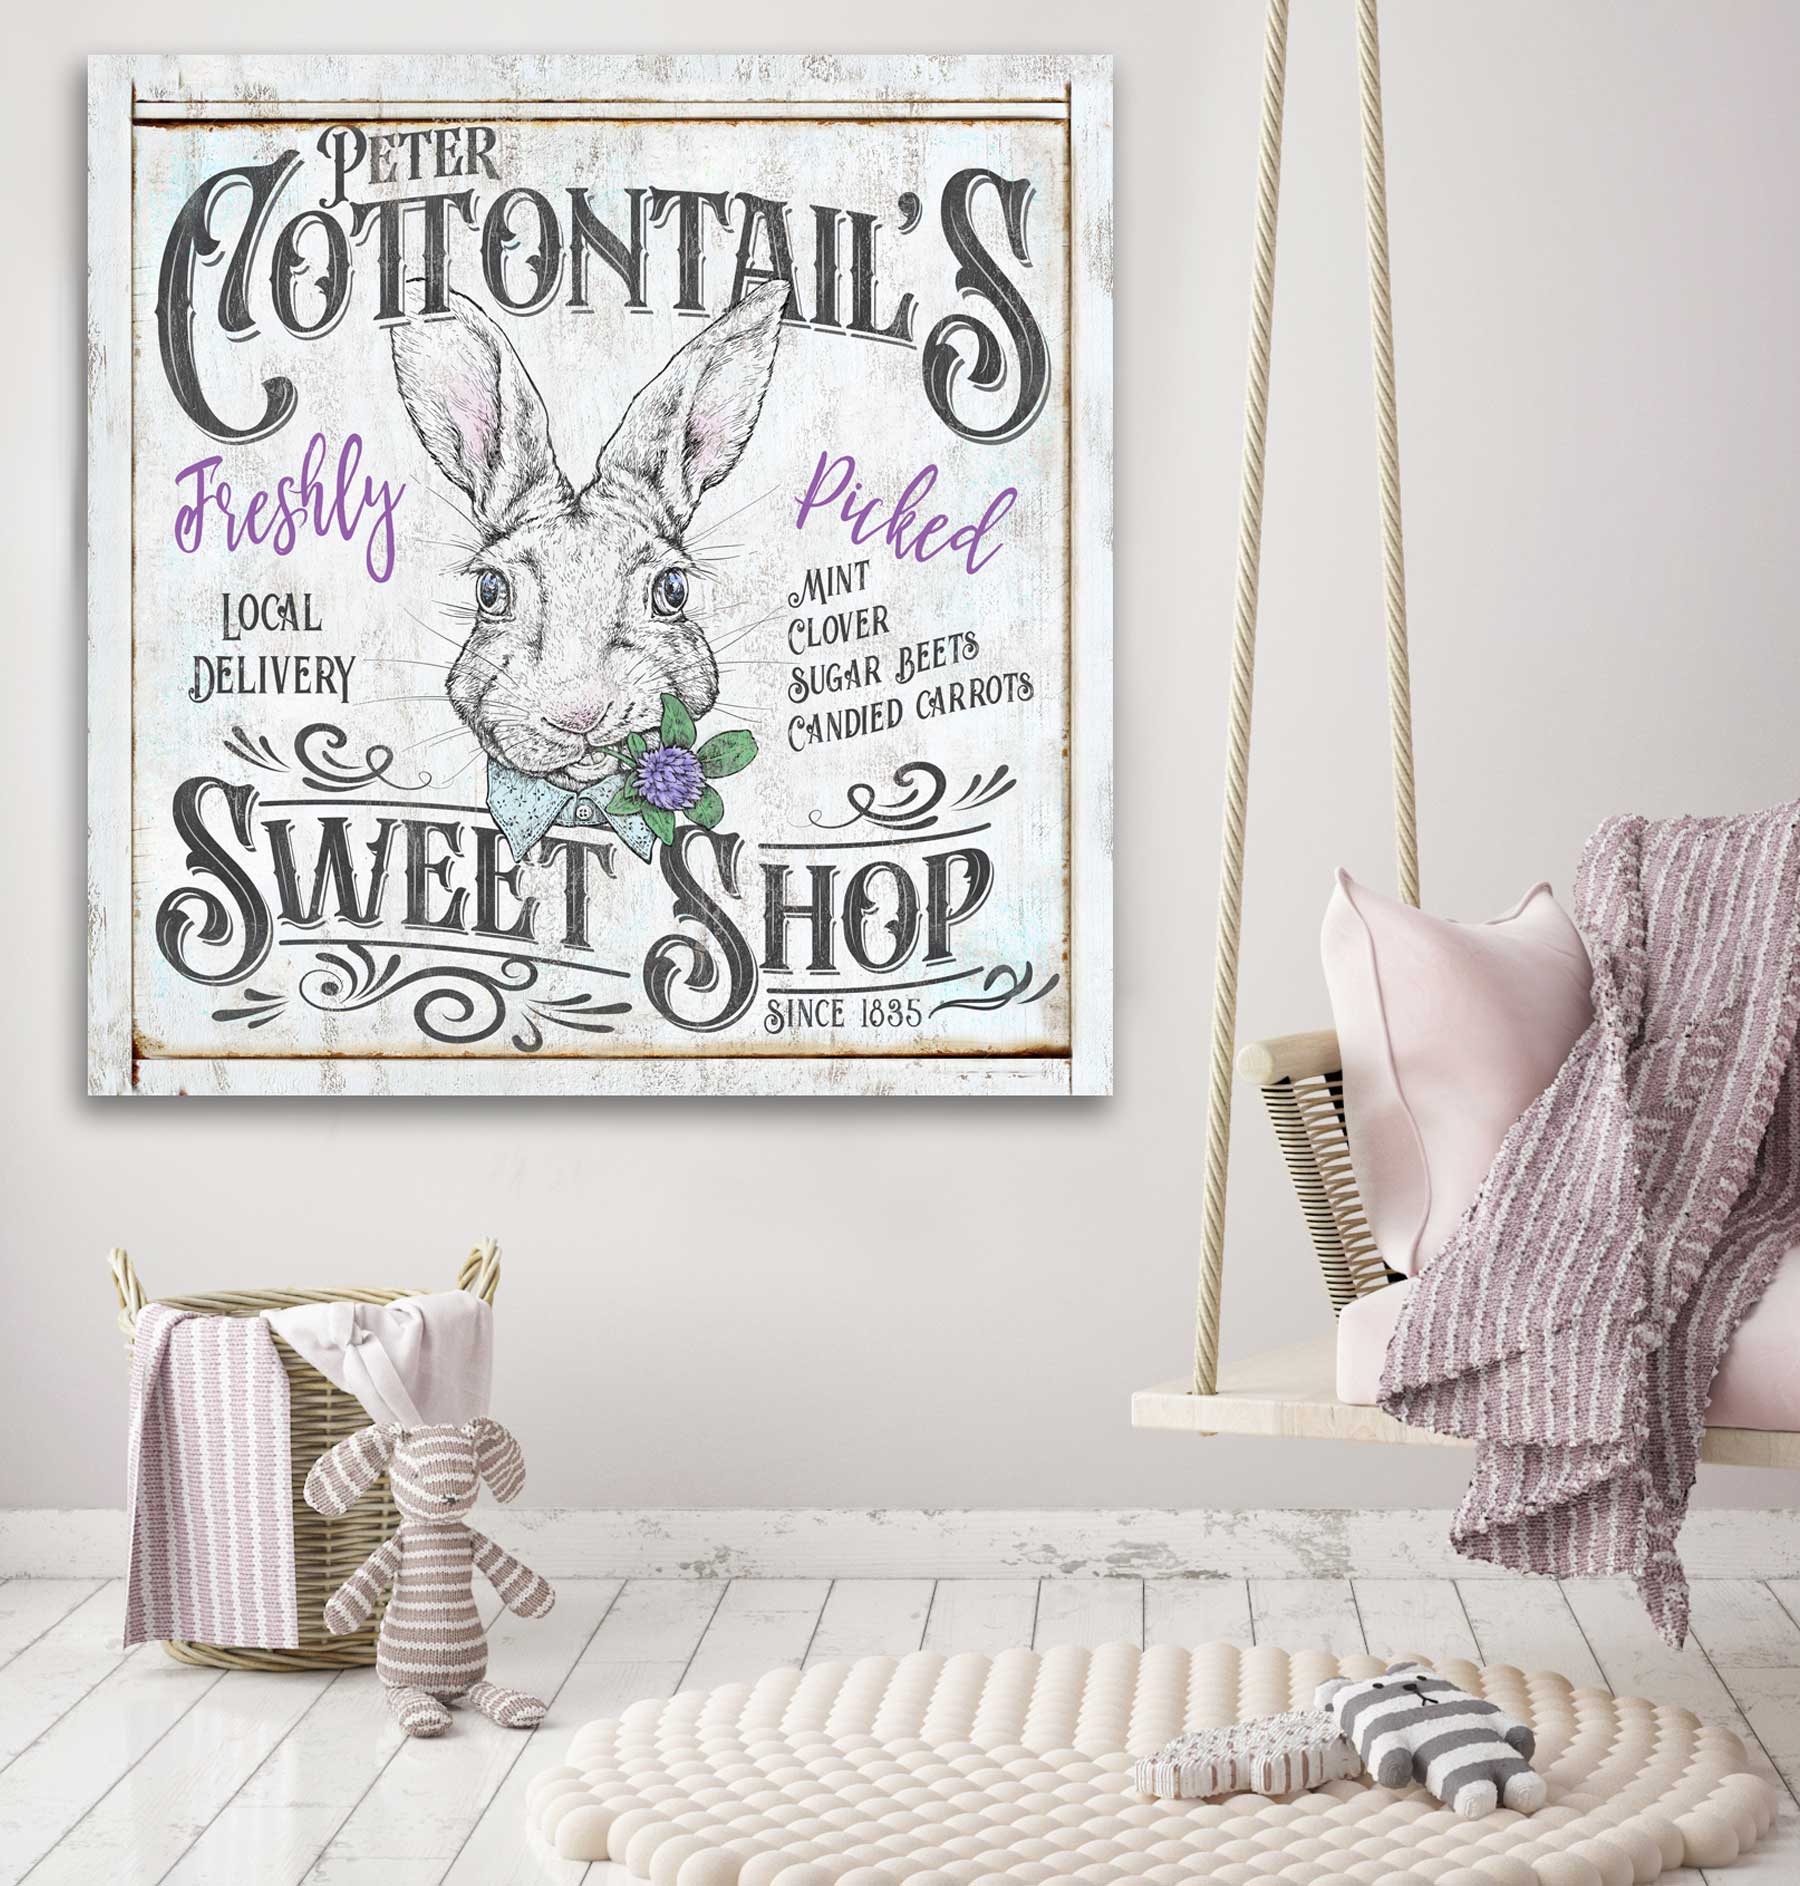 Peter Cottontail's Sweet Shop